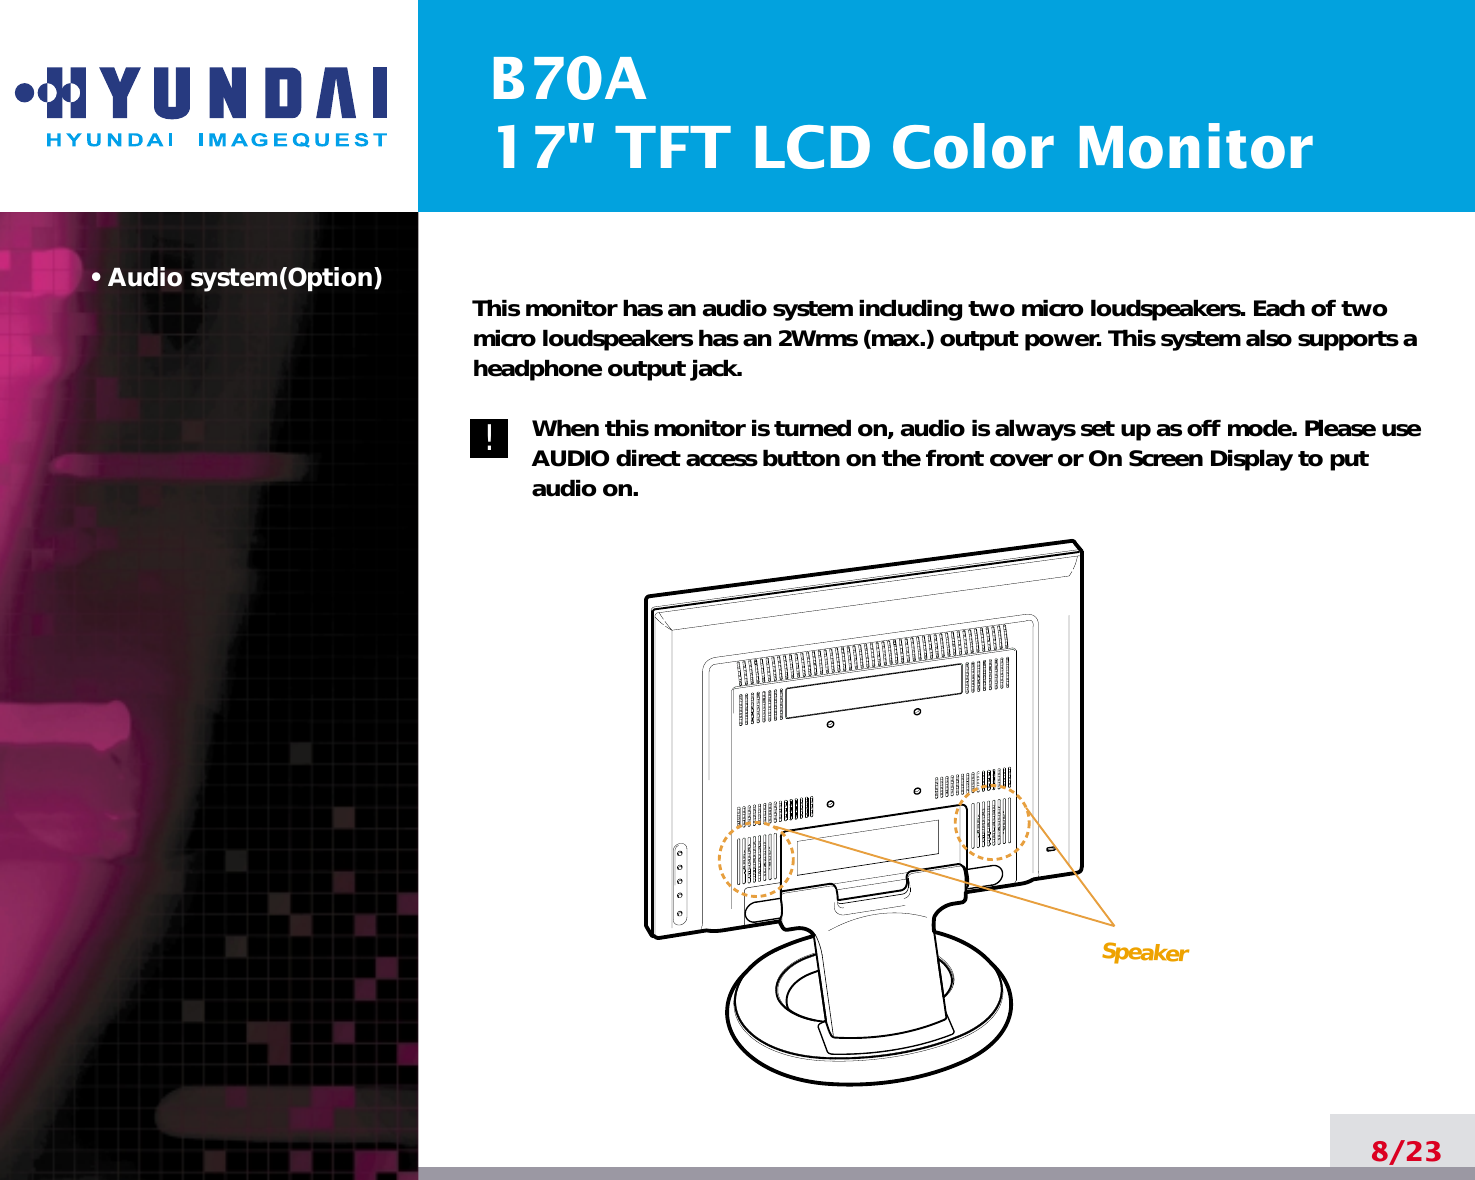 B70A17&quot; TFT LCD Color Monitor• Audio system(Option)8/23!!This monitor has an audio system including two micro loudspeakers. Each of twomicro loudspeakers has an 2Wrms (max.) output power. This system also supports aheadphone output jack.When this monitor is turned on, audio is always set up as off mode. Please useAUDIO direct access button on the front cover or On Screen Display to putaudio on. Speaker